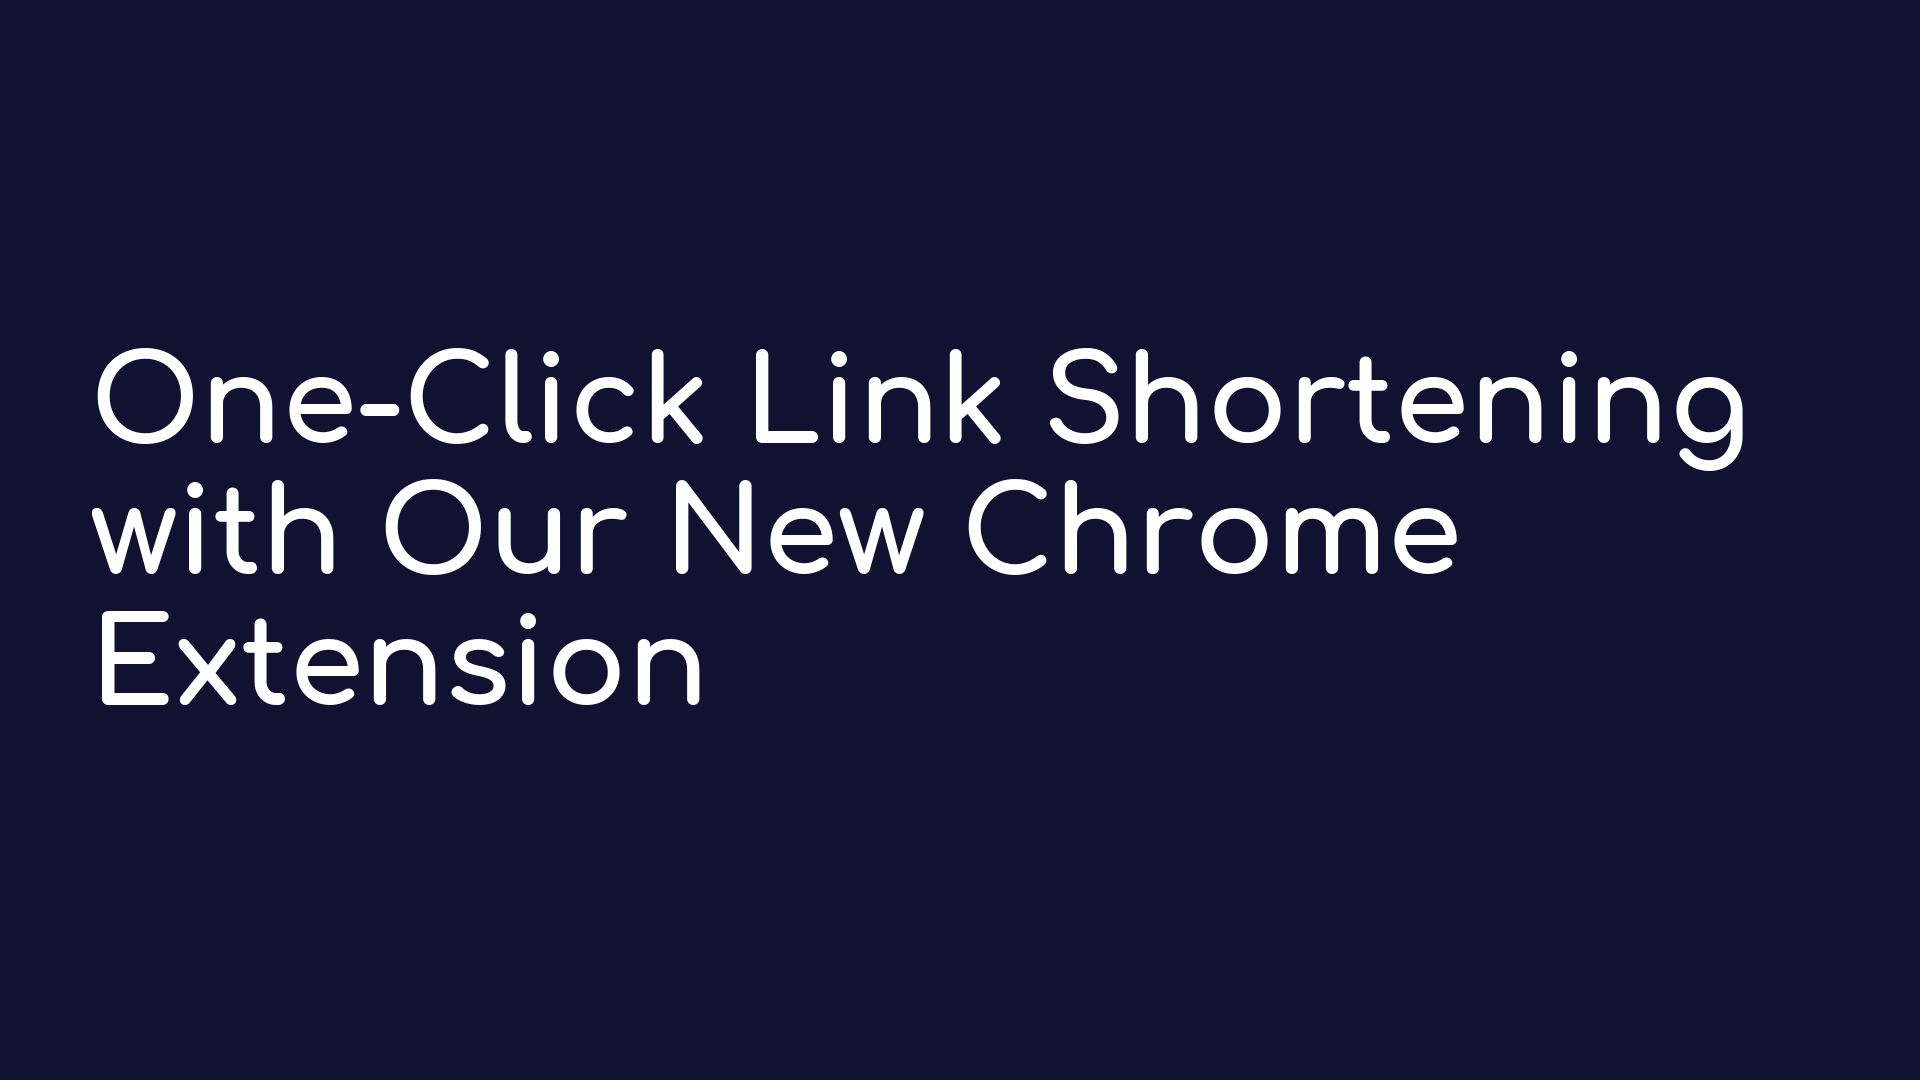 One-Click Link Shortening with Our New Chrome Extension